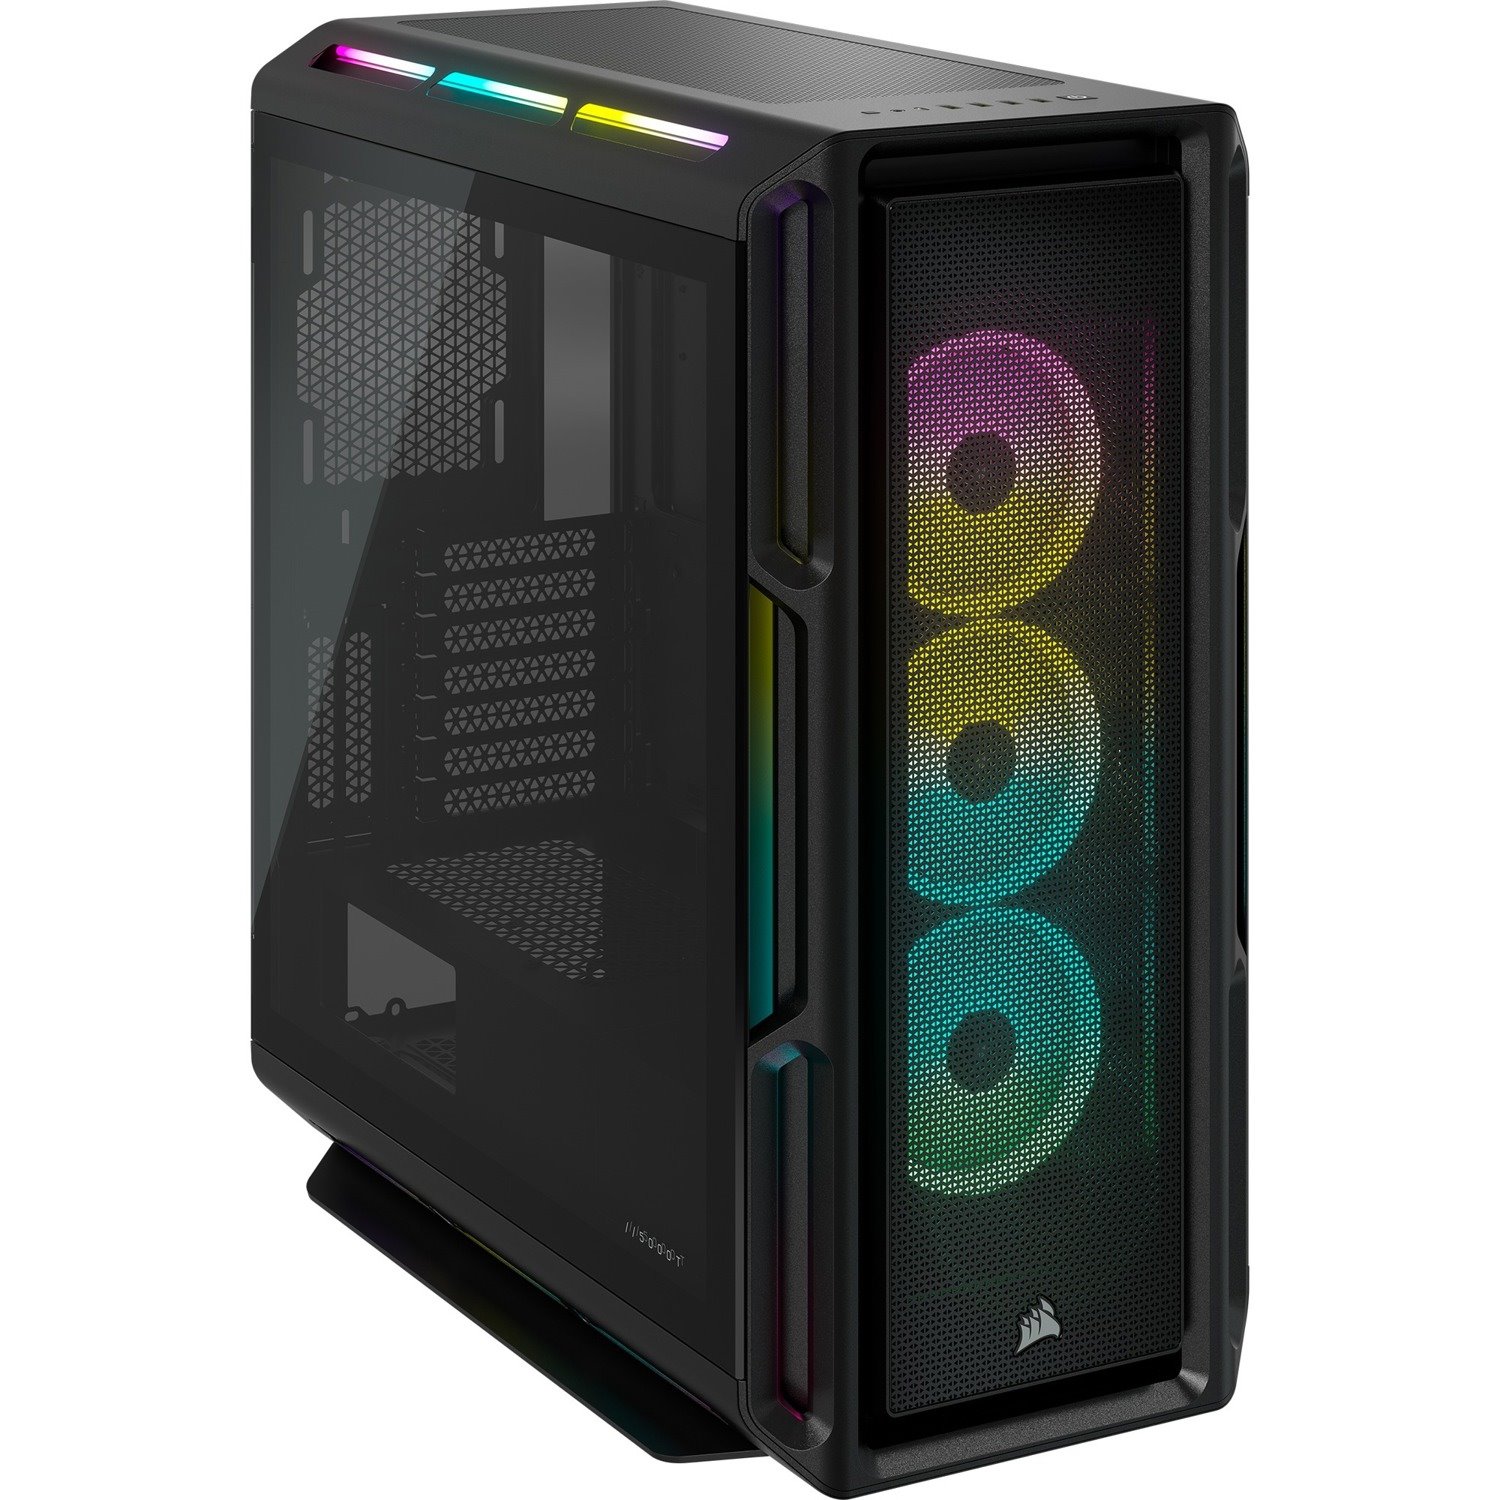 Corsair iCUE 5000T RGB Tempered Glass Mid-Tower ATX PC Case - Black